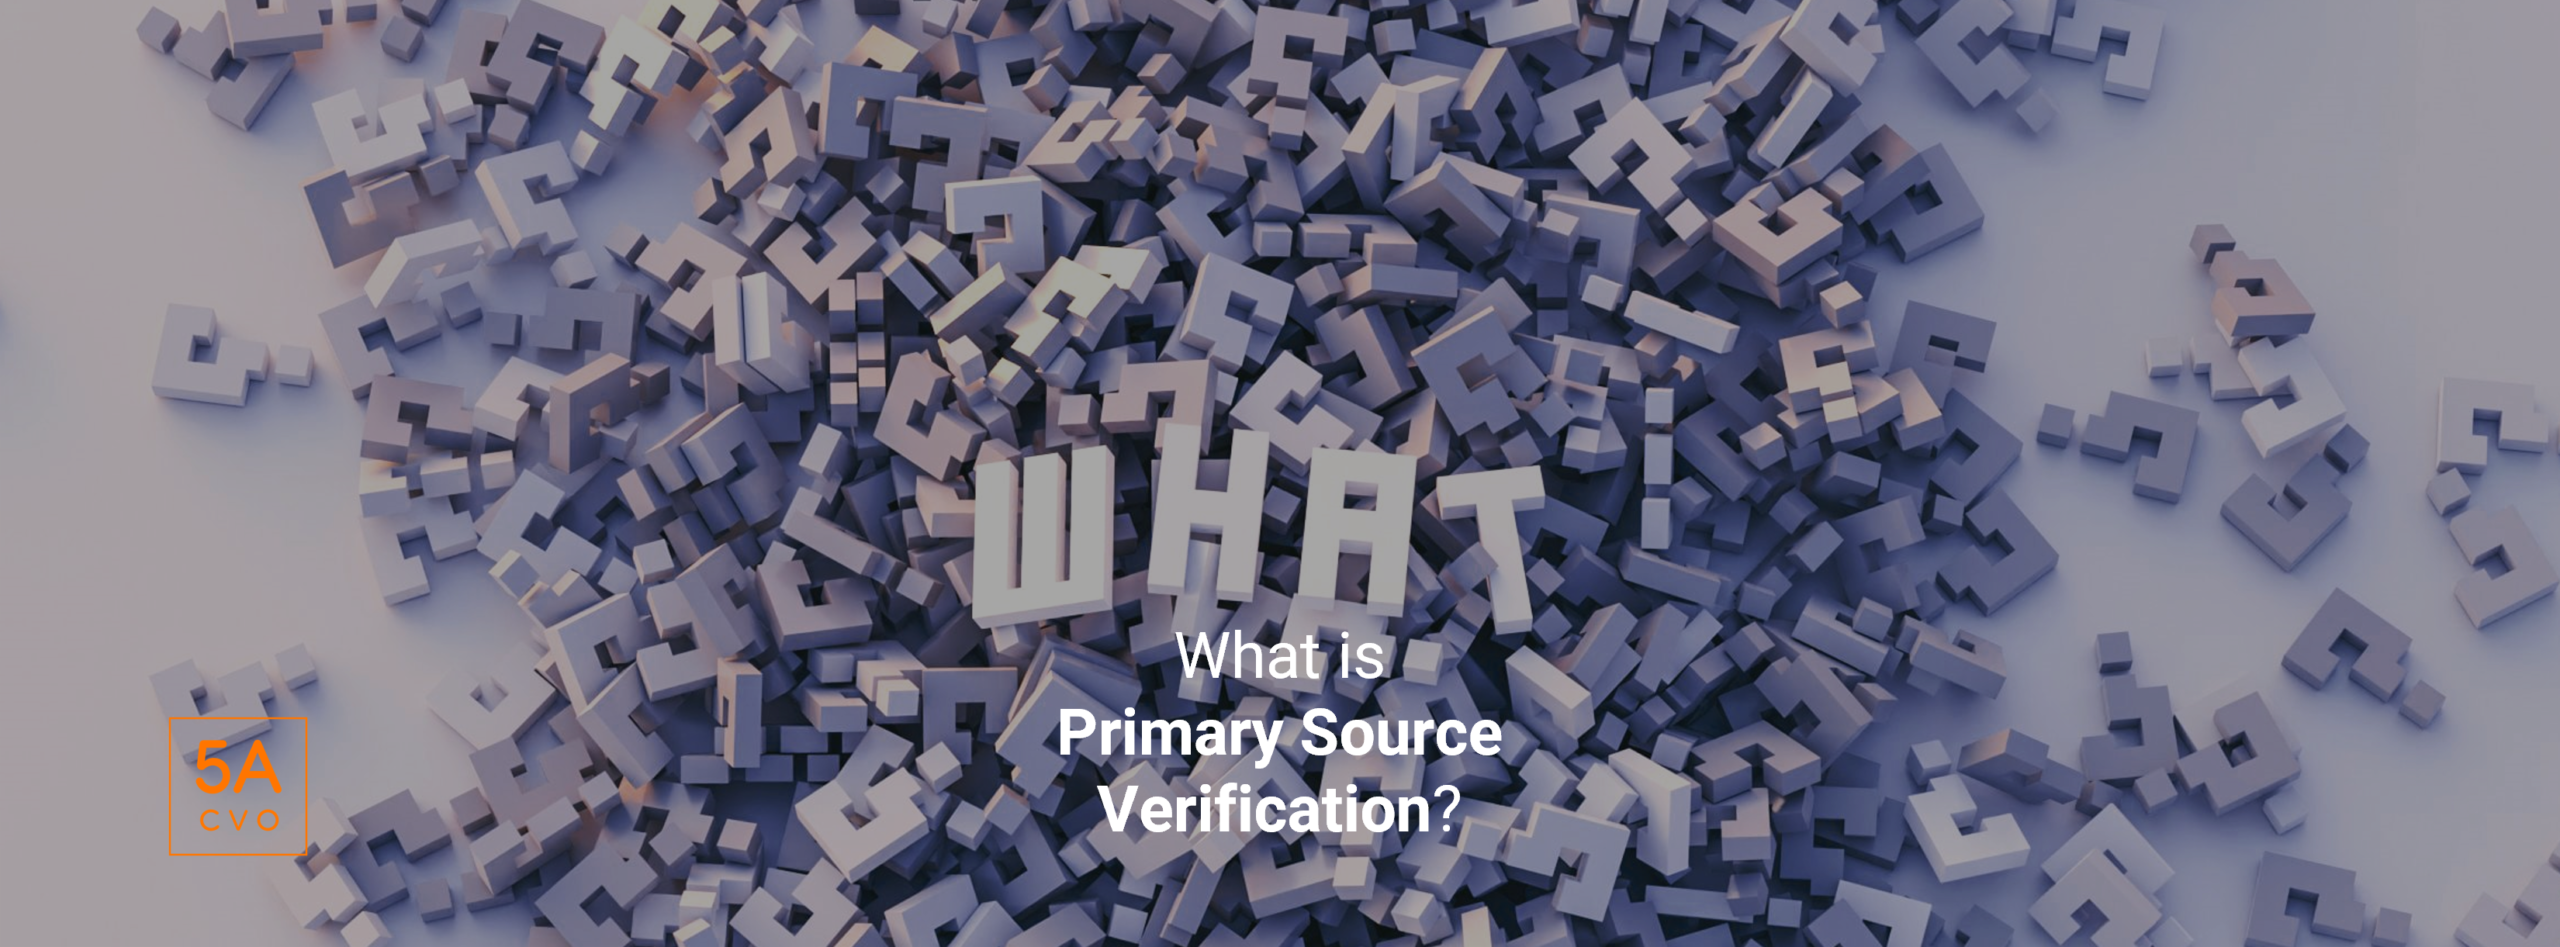 5ACVO What is Primary Source Verification